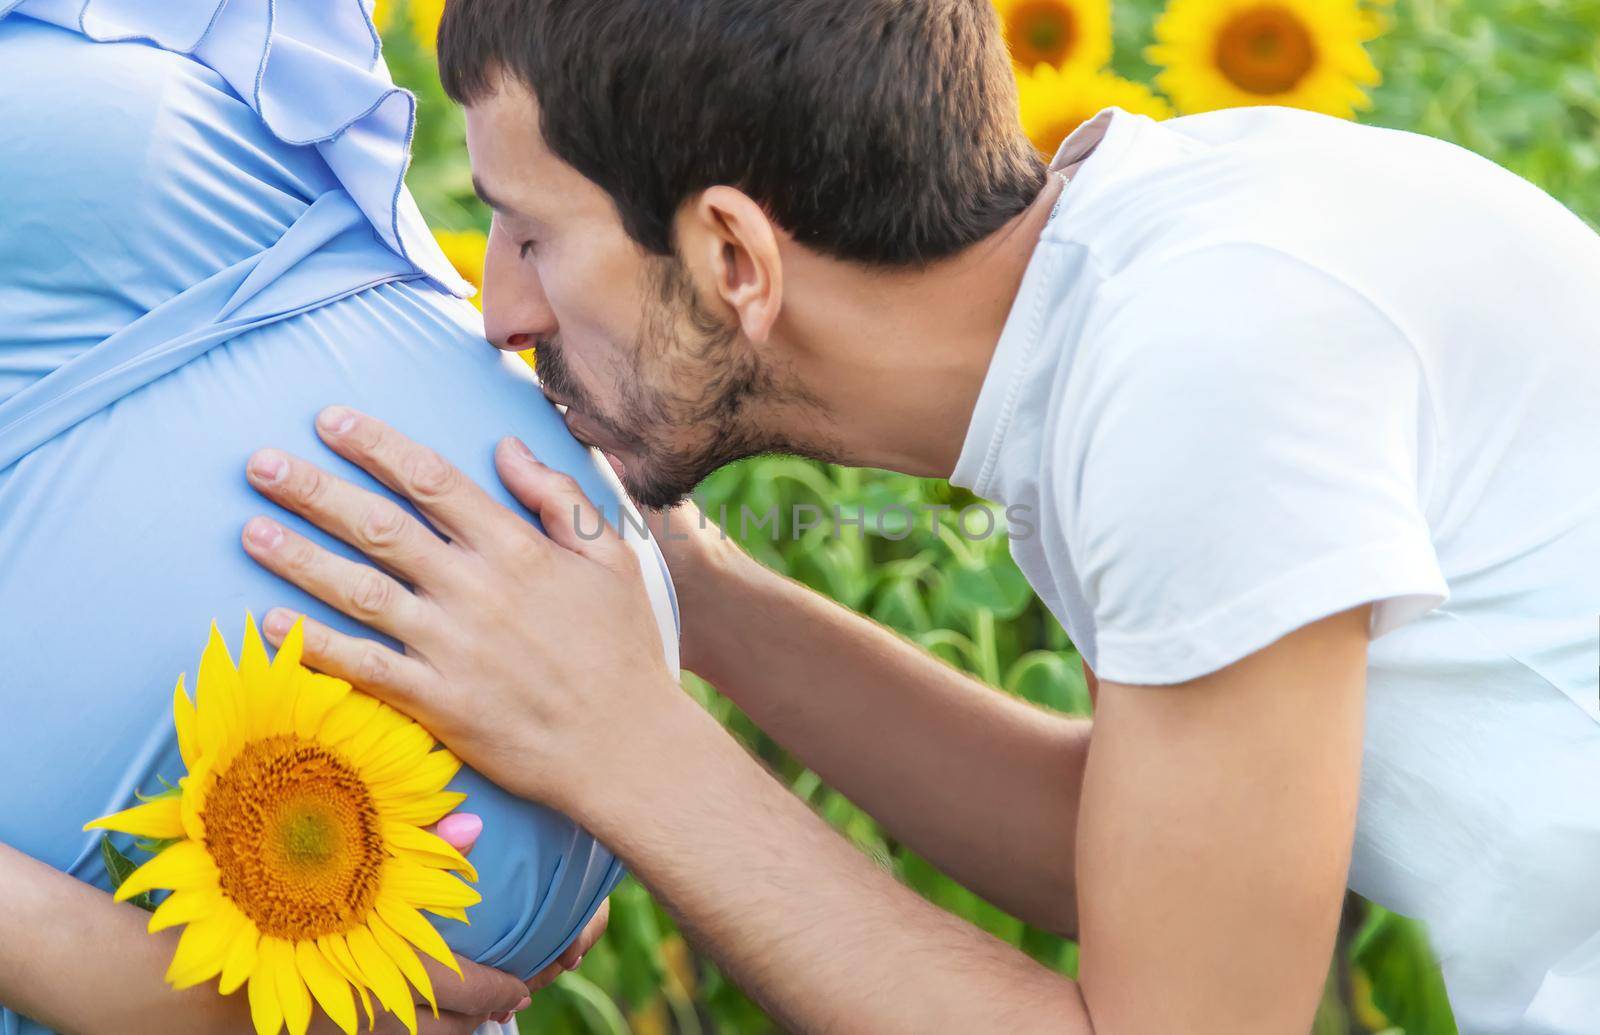 Pregnant woman and man in a field of sunflowers. Selective focus. by yanadjana